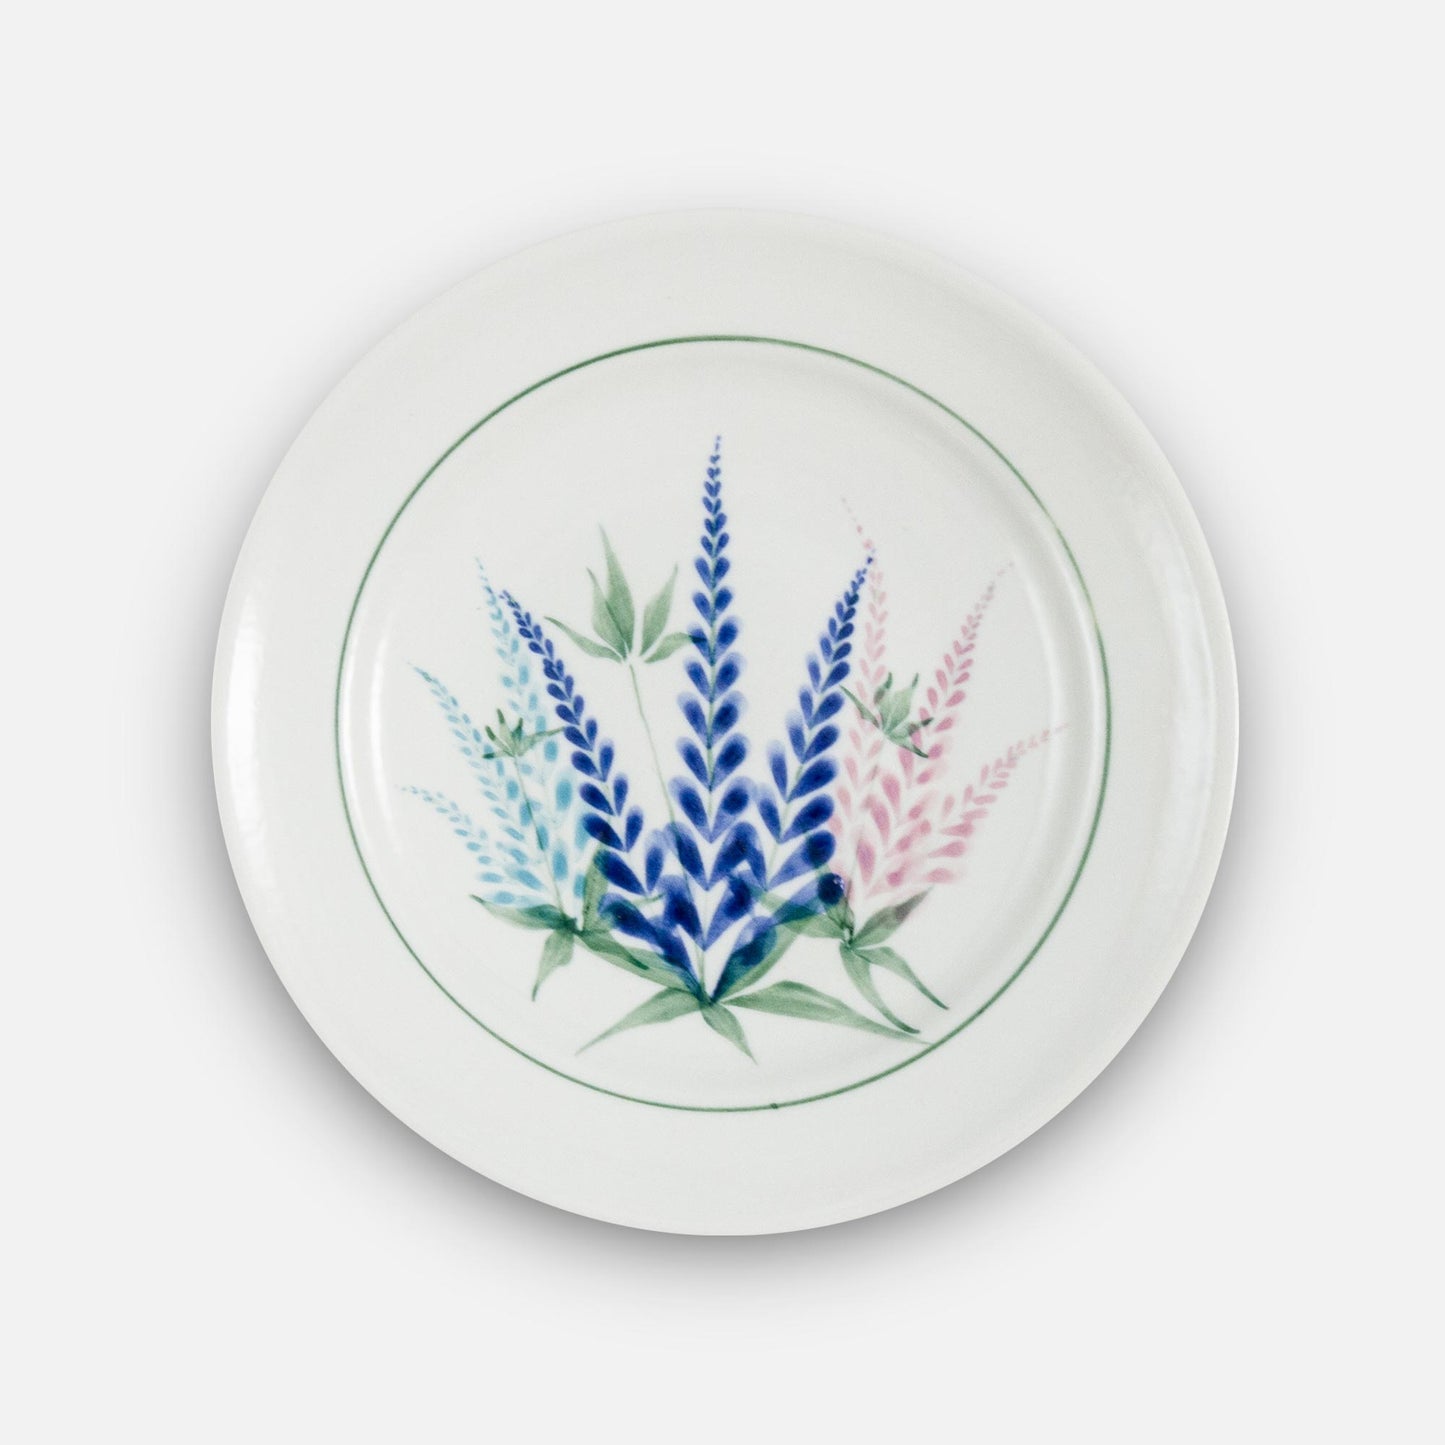 Handmade Pottery Rimless Dinner Plate made by Georgetown Pottery in Maine in Lupine pattern